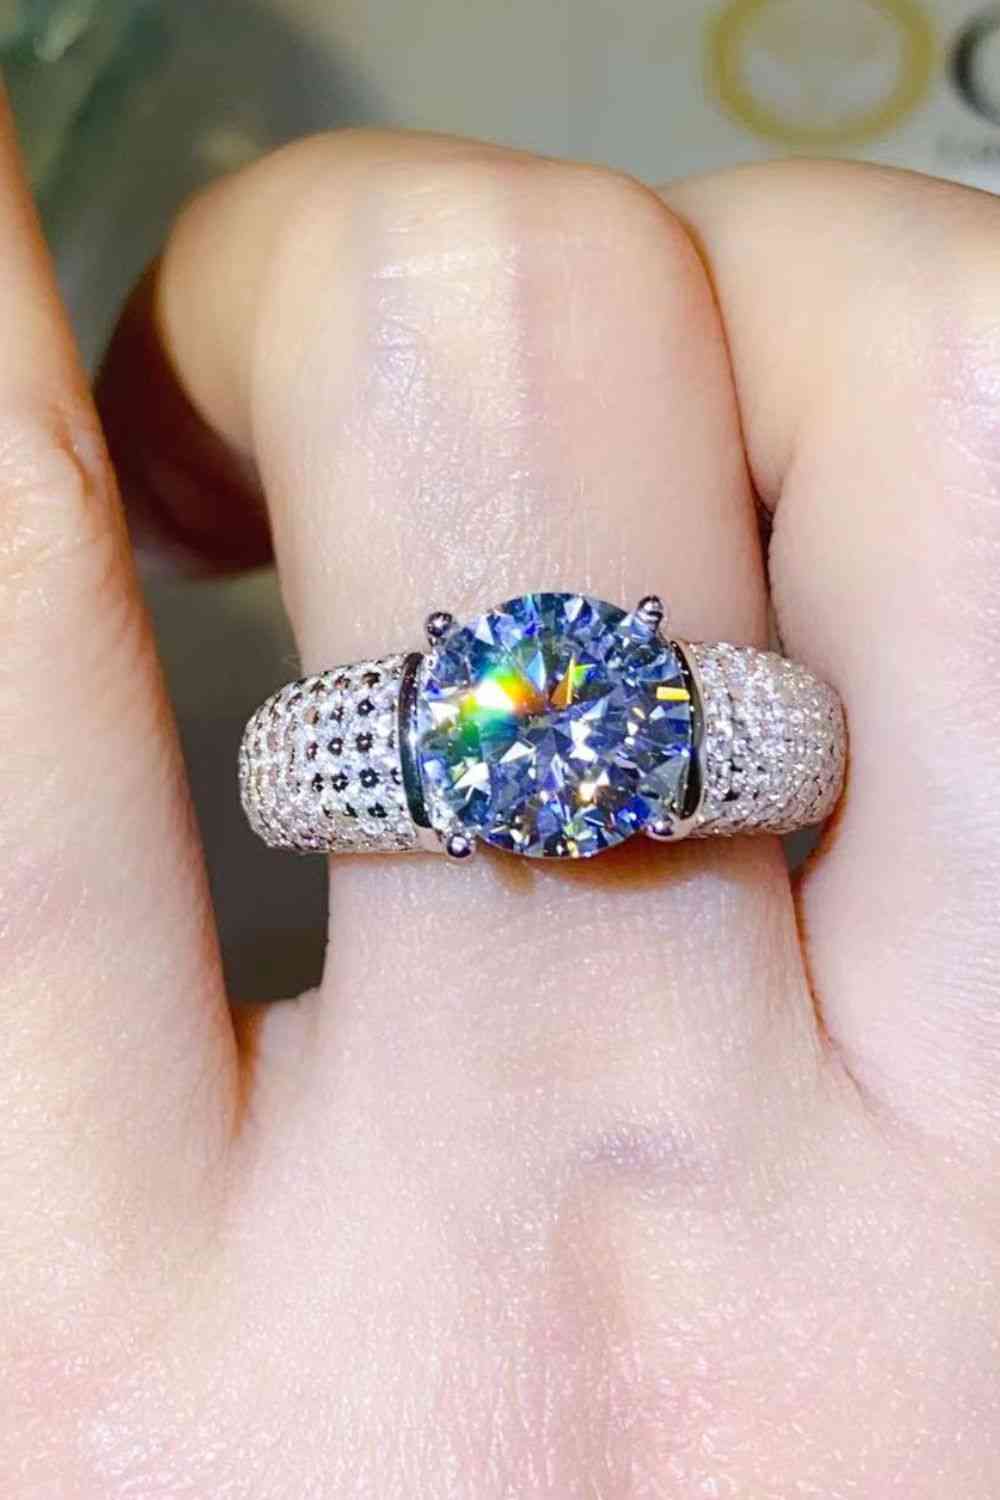 a woman's hand holding a ring with a rainbow colored diamond